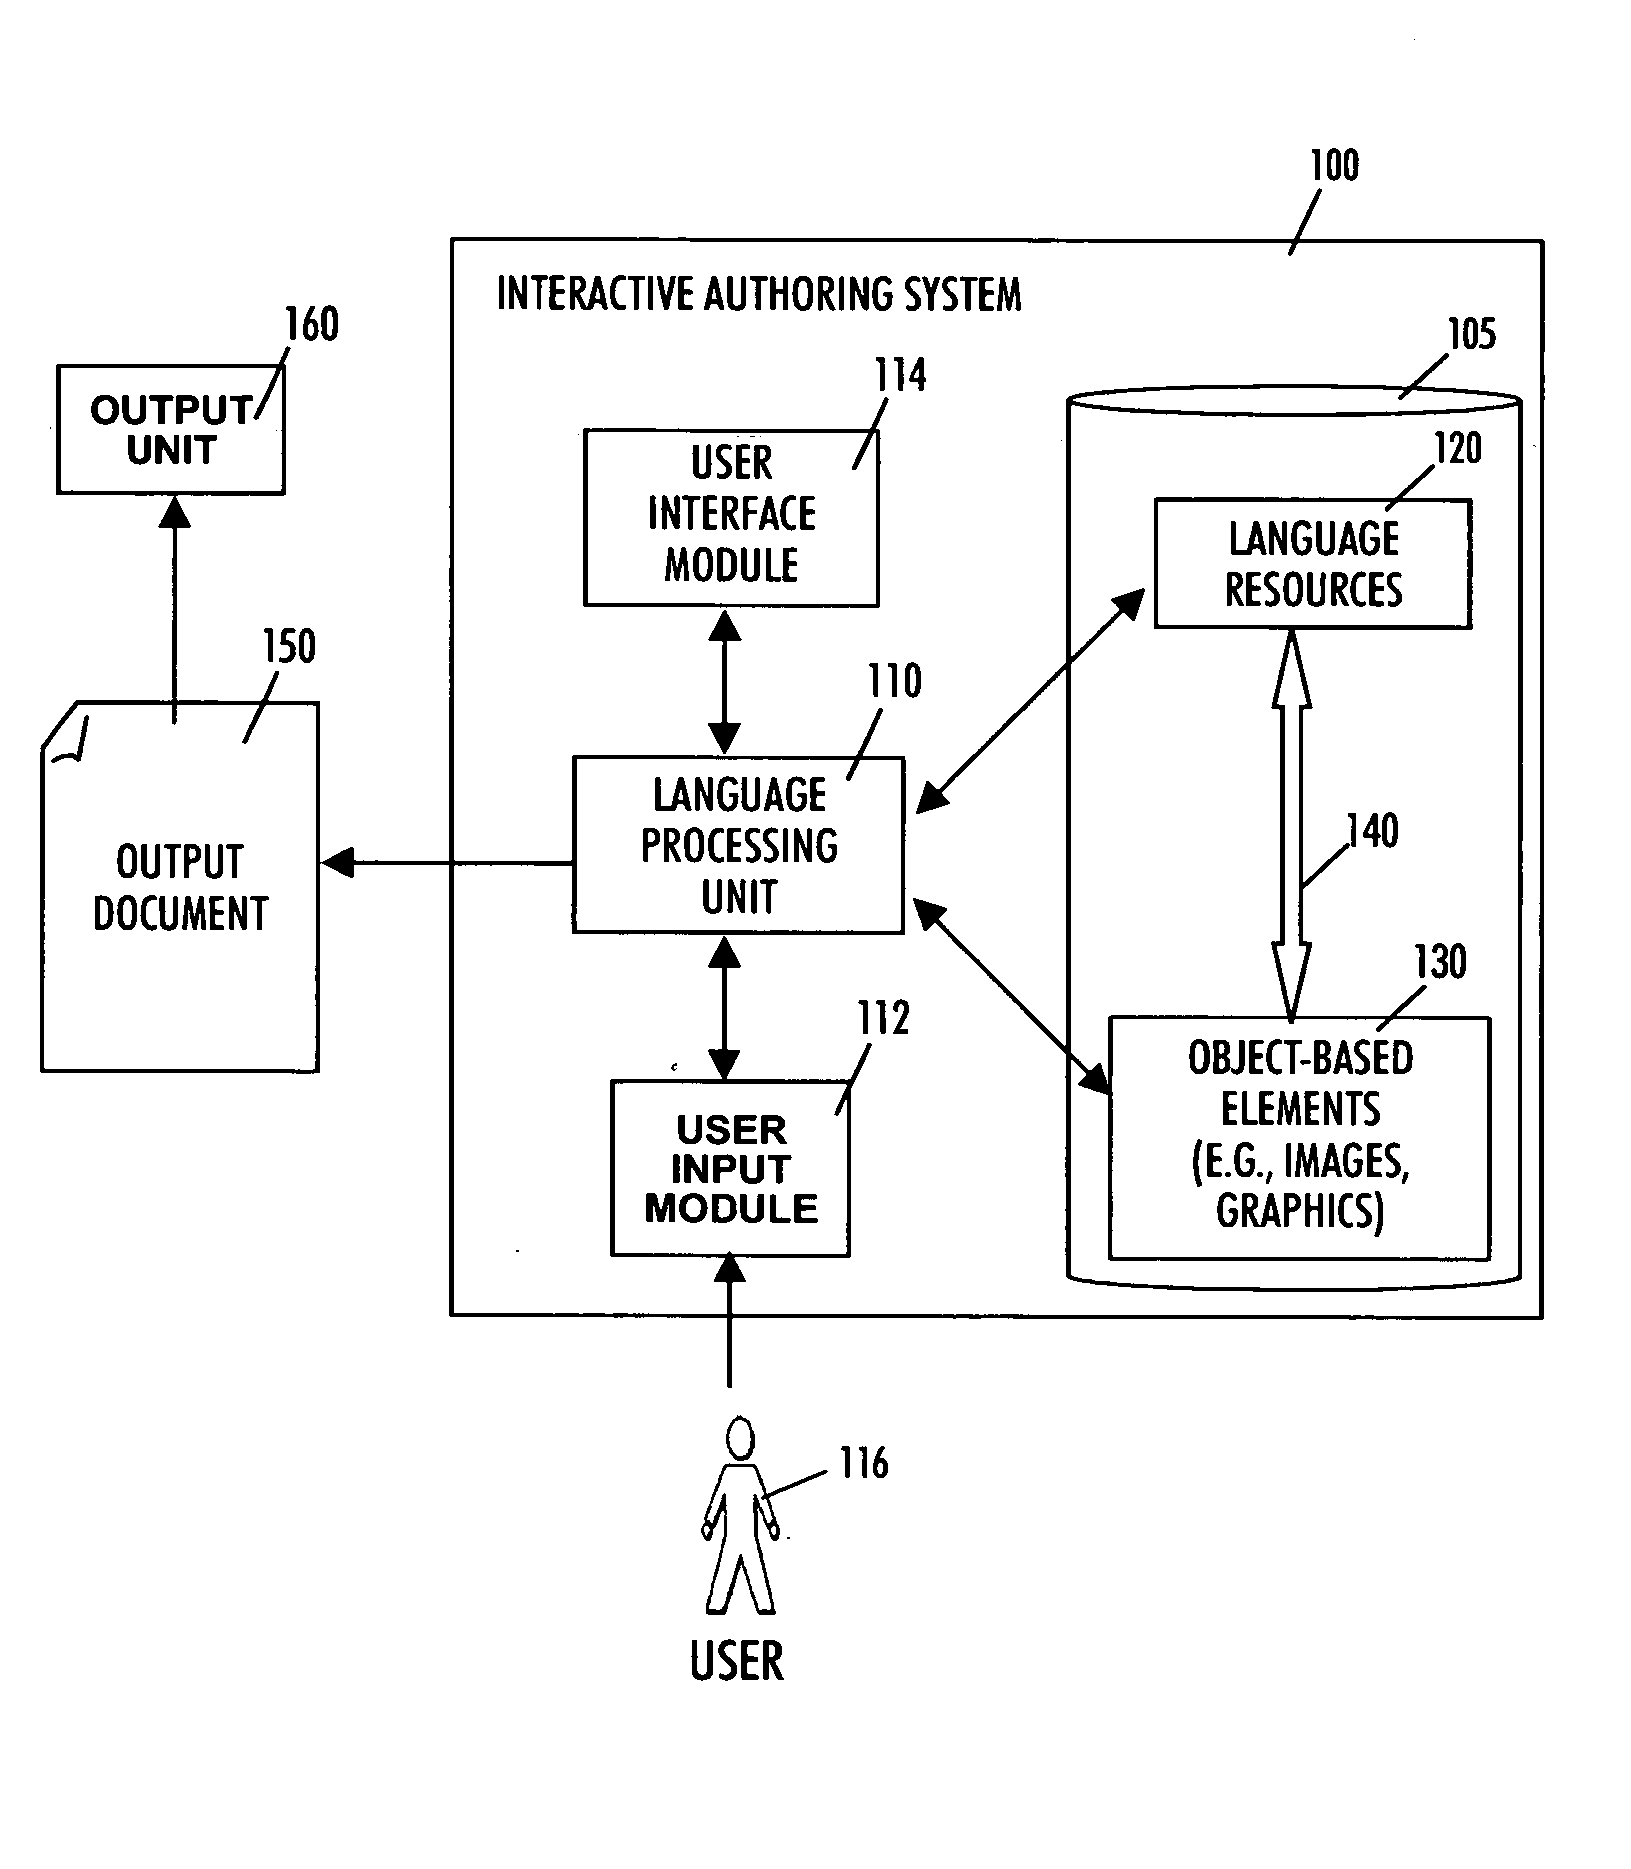 Method and apparatus for authoring documents using object-based elements as an interaction interface